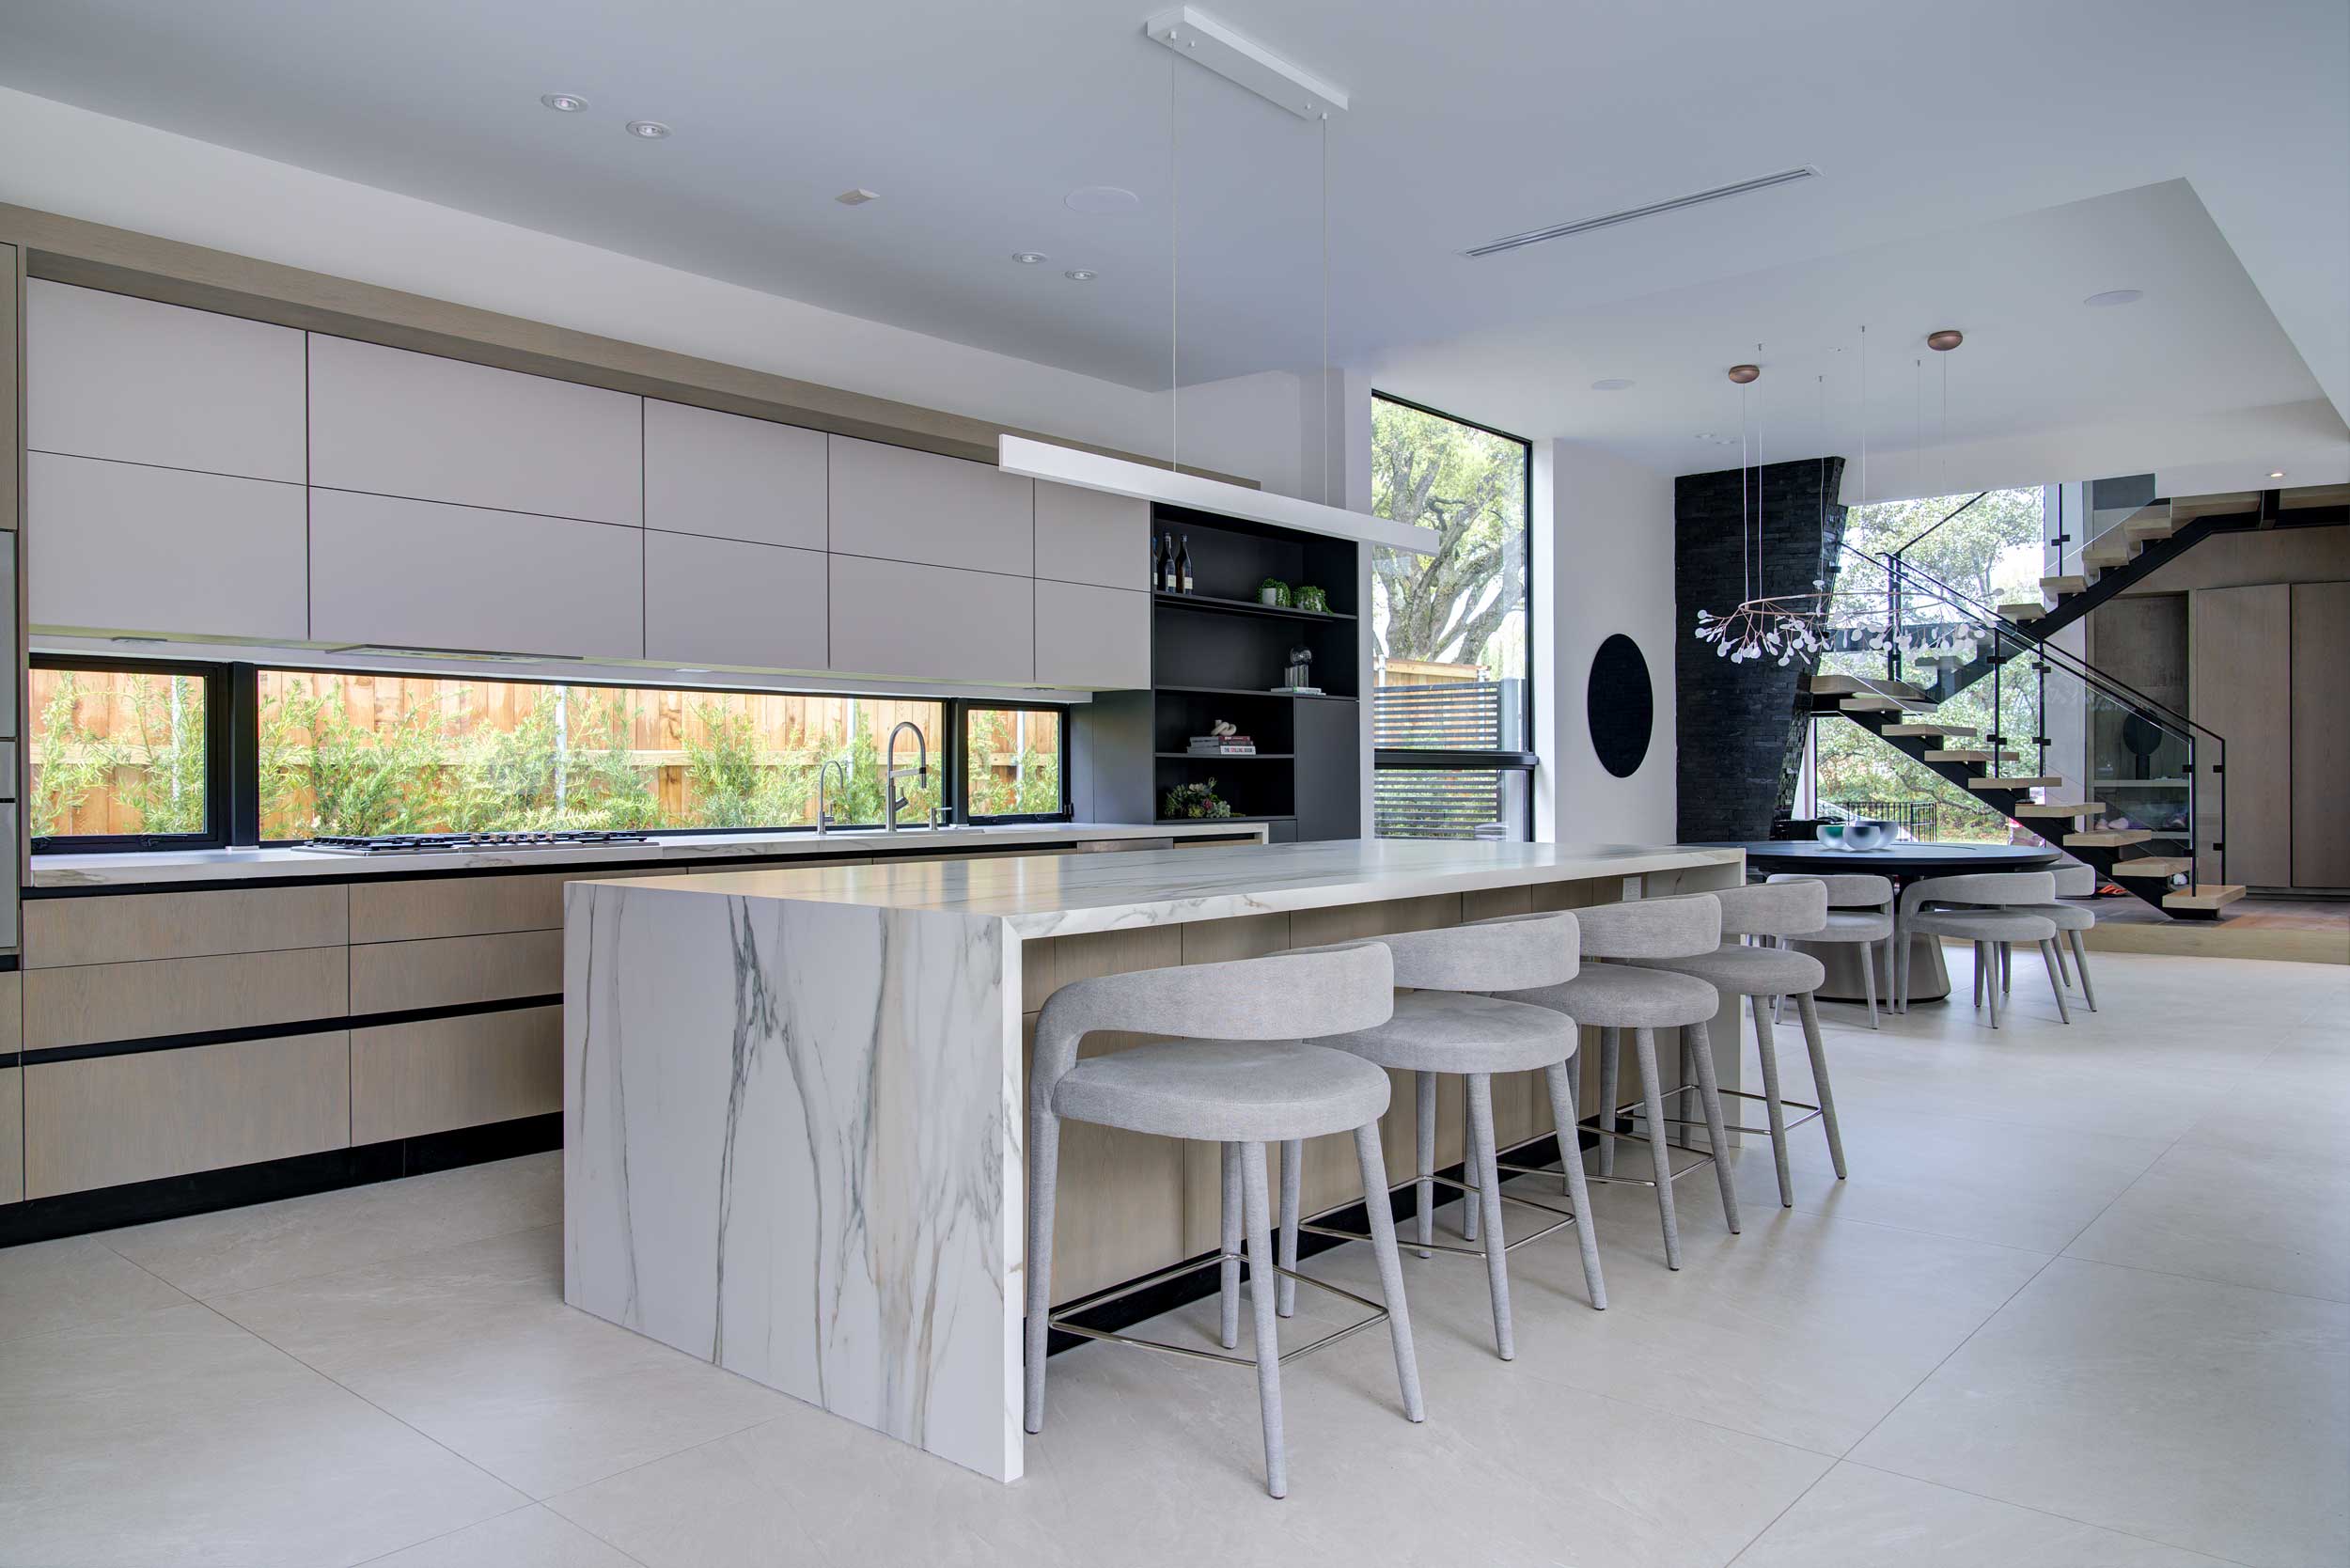 Large-format Porcelain Sintered Stone Kitchen Countertops and Waterfall Island